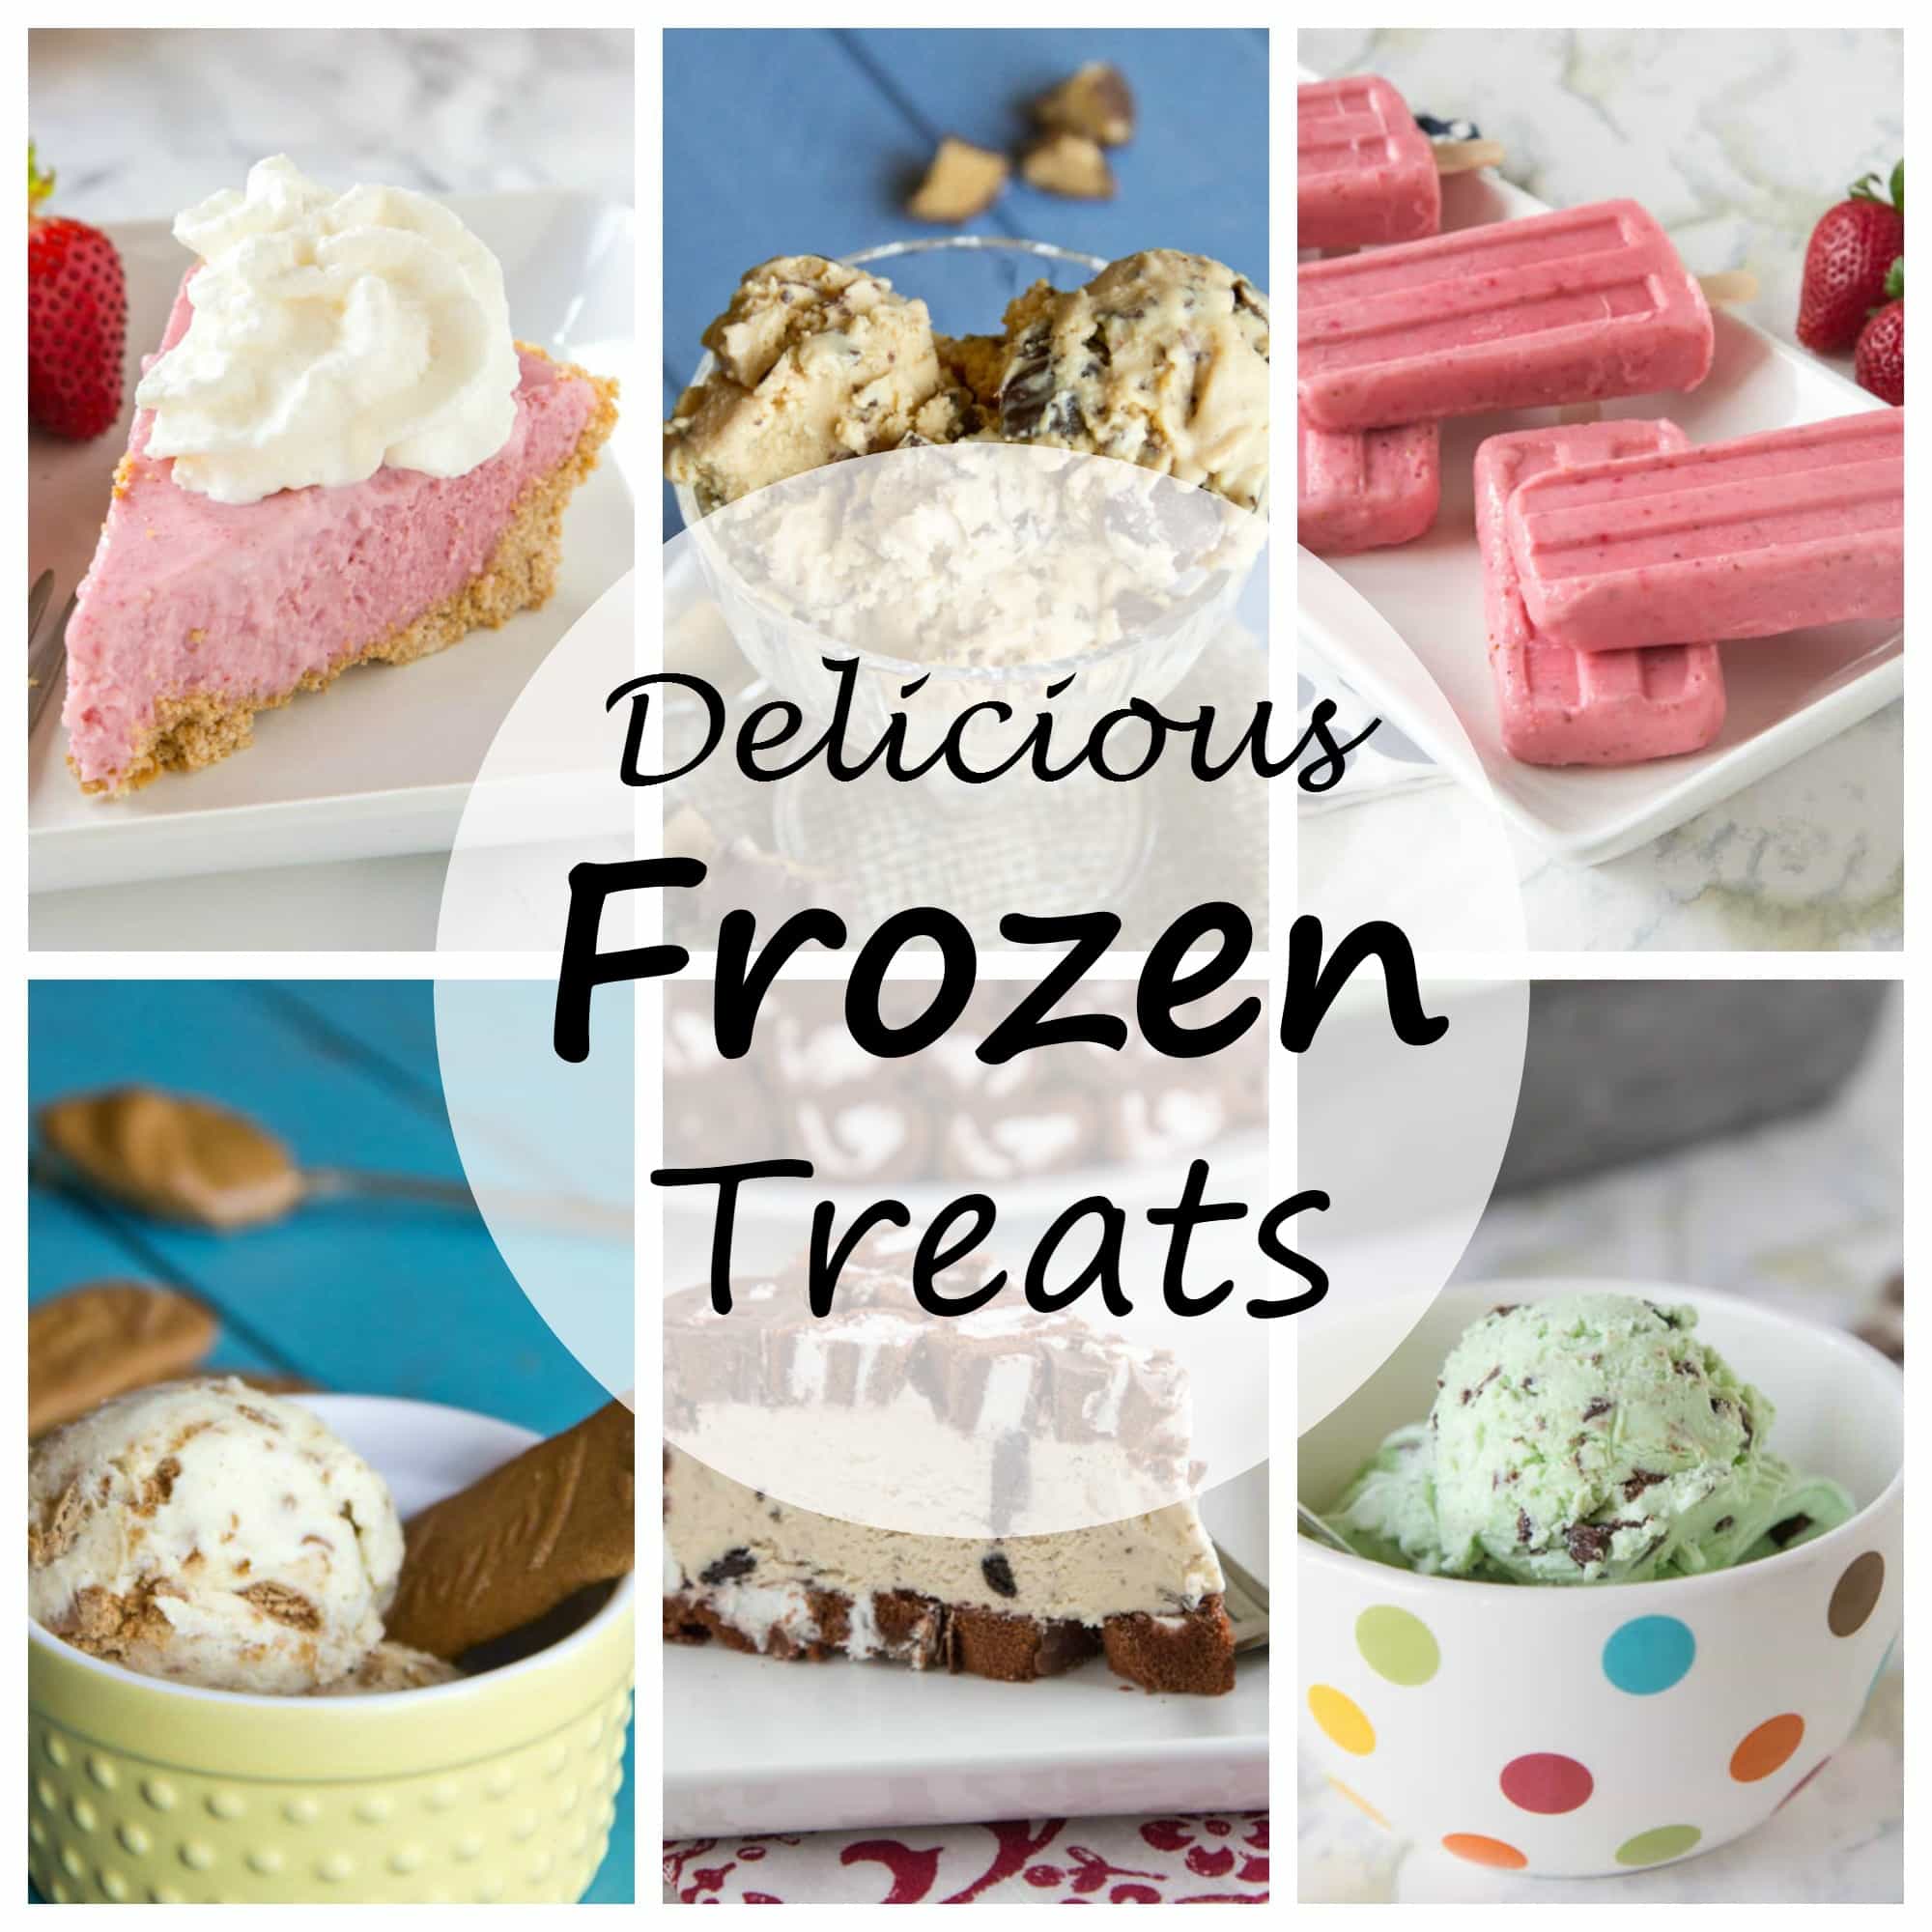 Delicious Frozen Treats - get in the mood for summer with these cool and refreshing treats! Popsicles, ice cream, milkshakes and even cake!